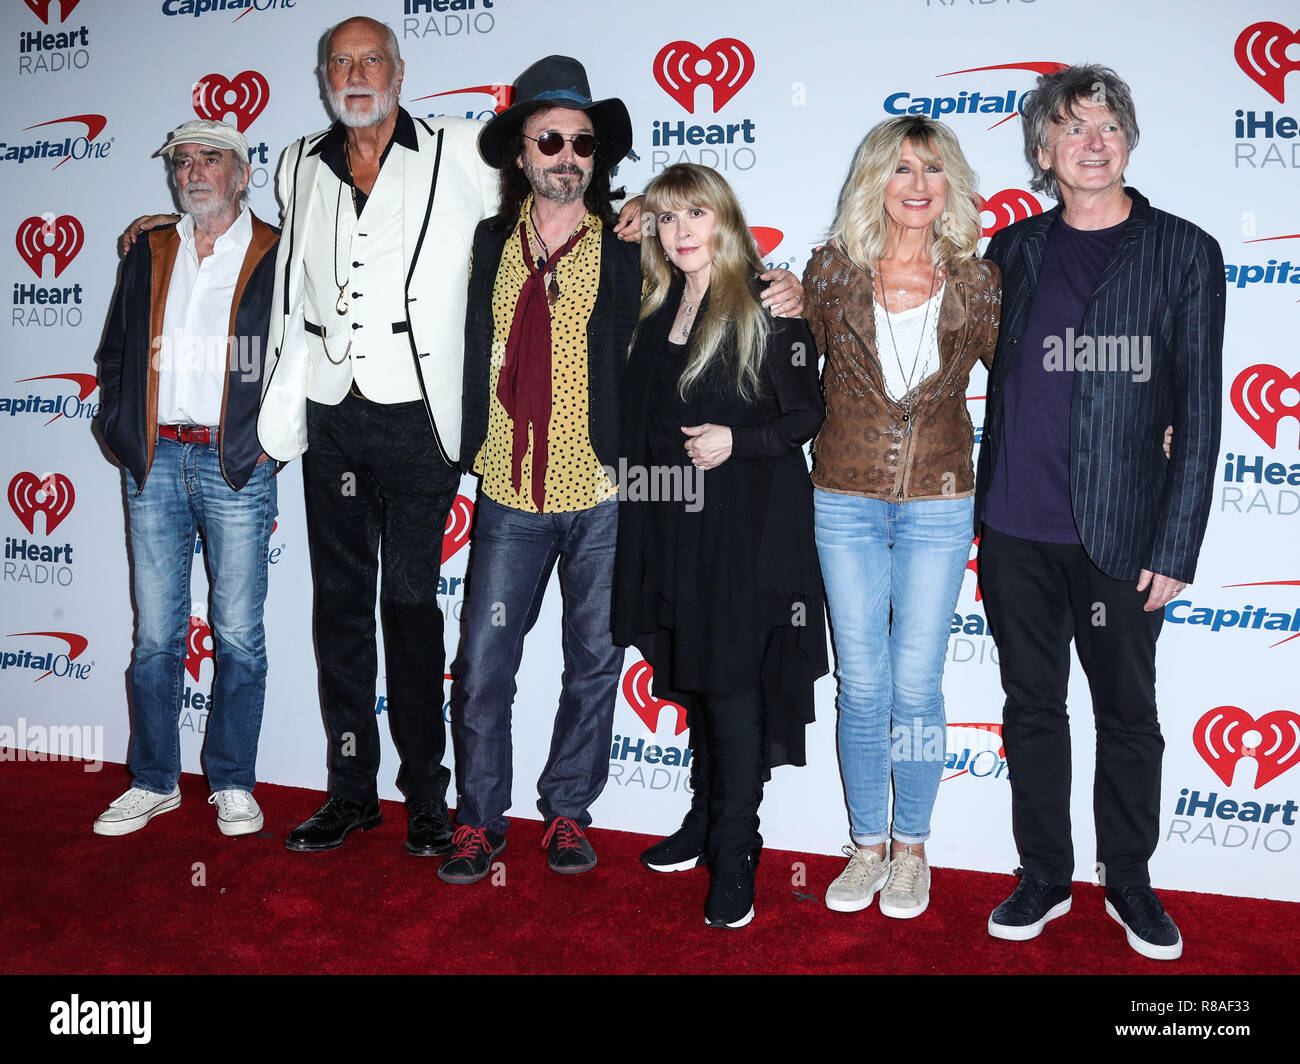 LAS VEGAS, NV, USA - SEPTEMBER 21: John McVie, Mick Fleetwood, Mike Campbell, Stevie Nicks, Christine McVie, Neil Finn, Fleetwood Mac in the press room during the 2018 iHeartRadio Music Festival - Night 1 held at T-Mobile Arena on September 21, 2018 in Las Vegas, Nevada, United States. (Photo by Xavier Collin/Image Press Agency) Stock Photo